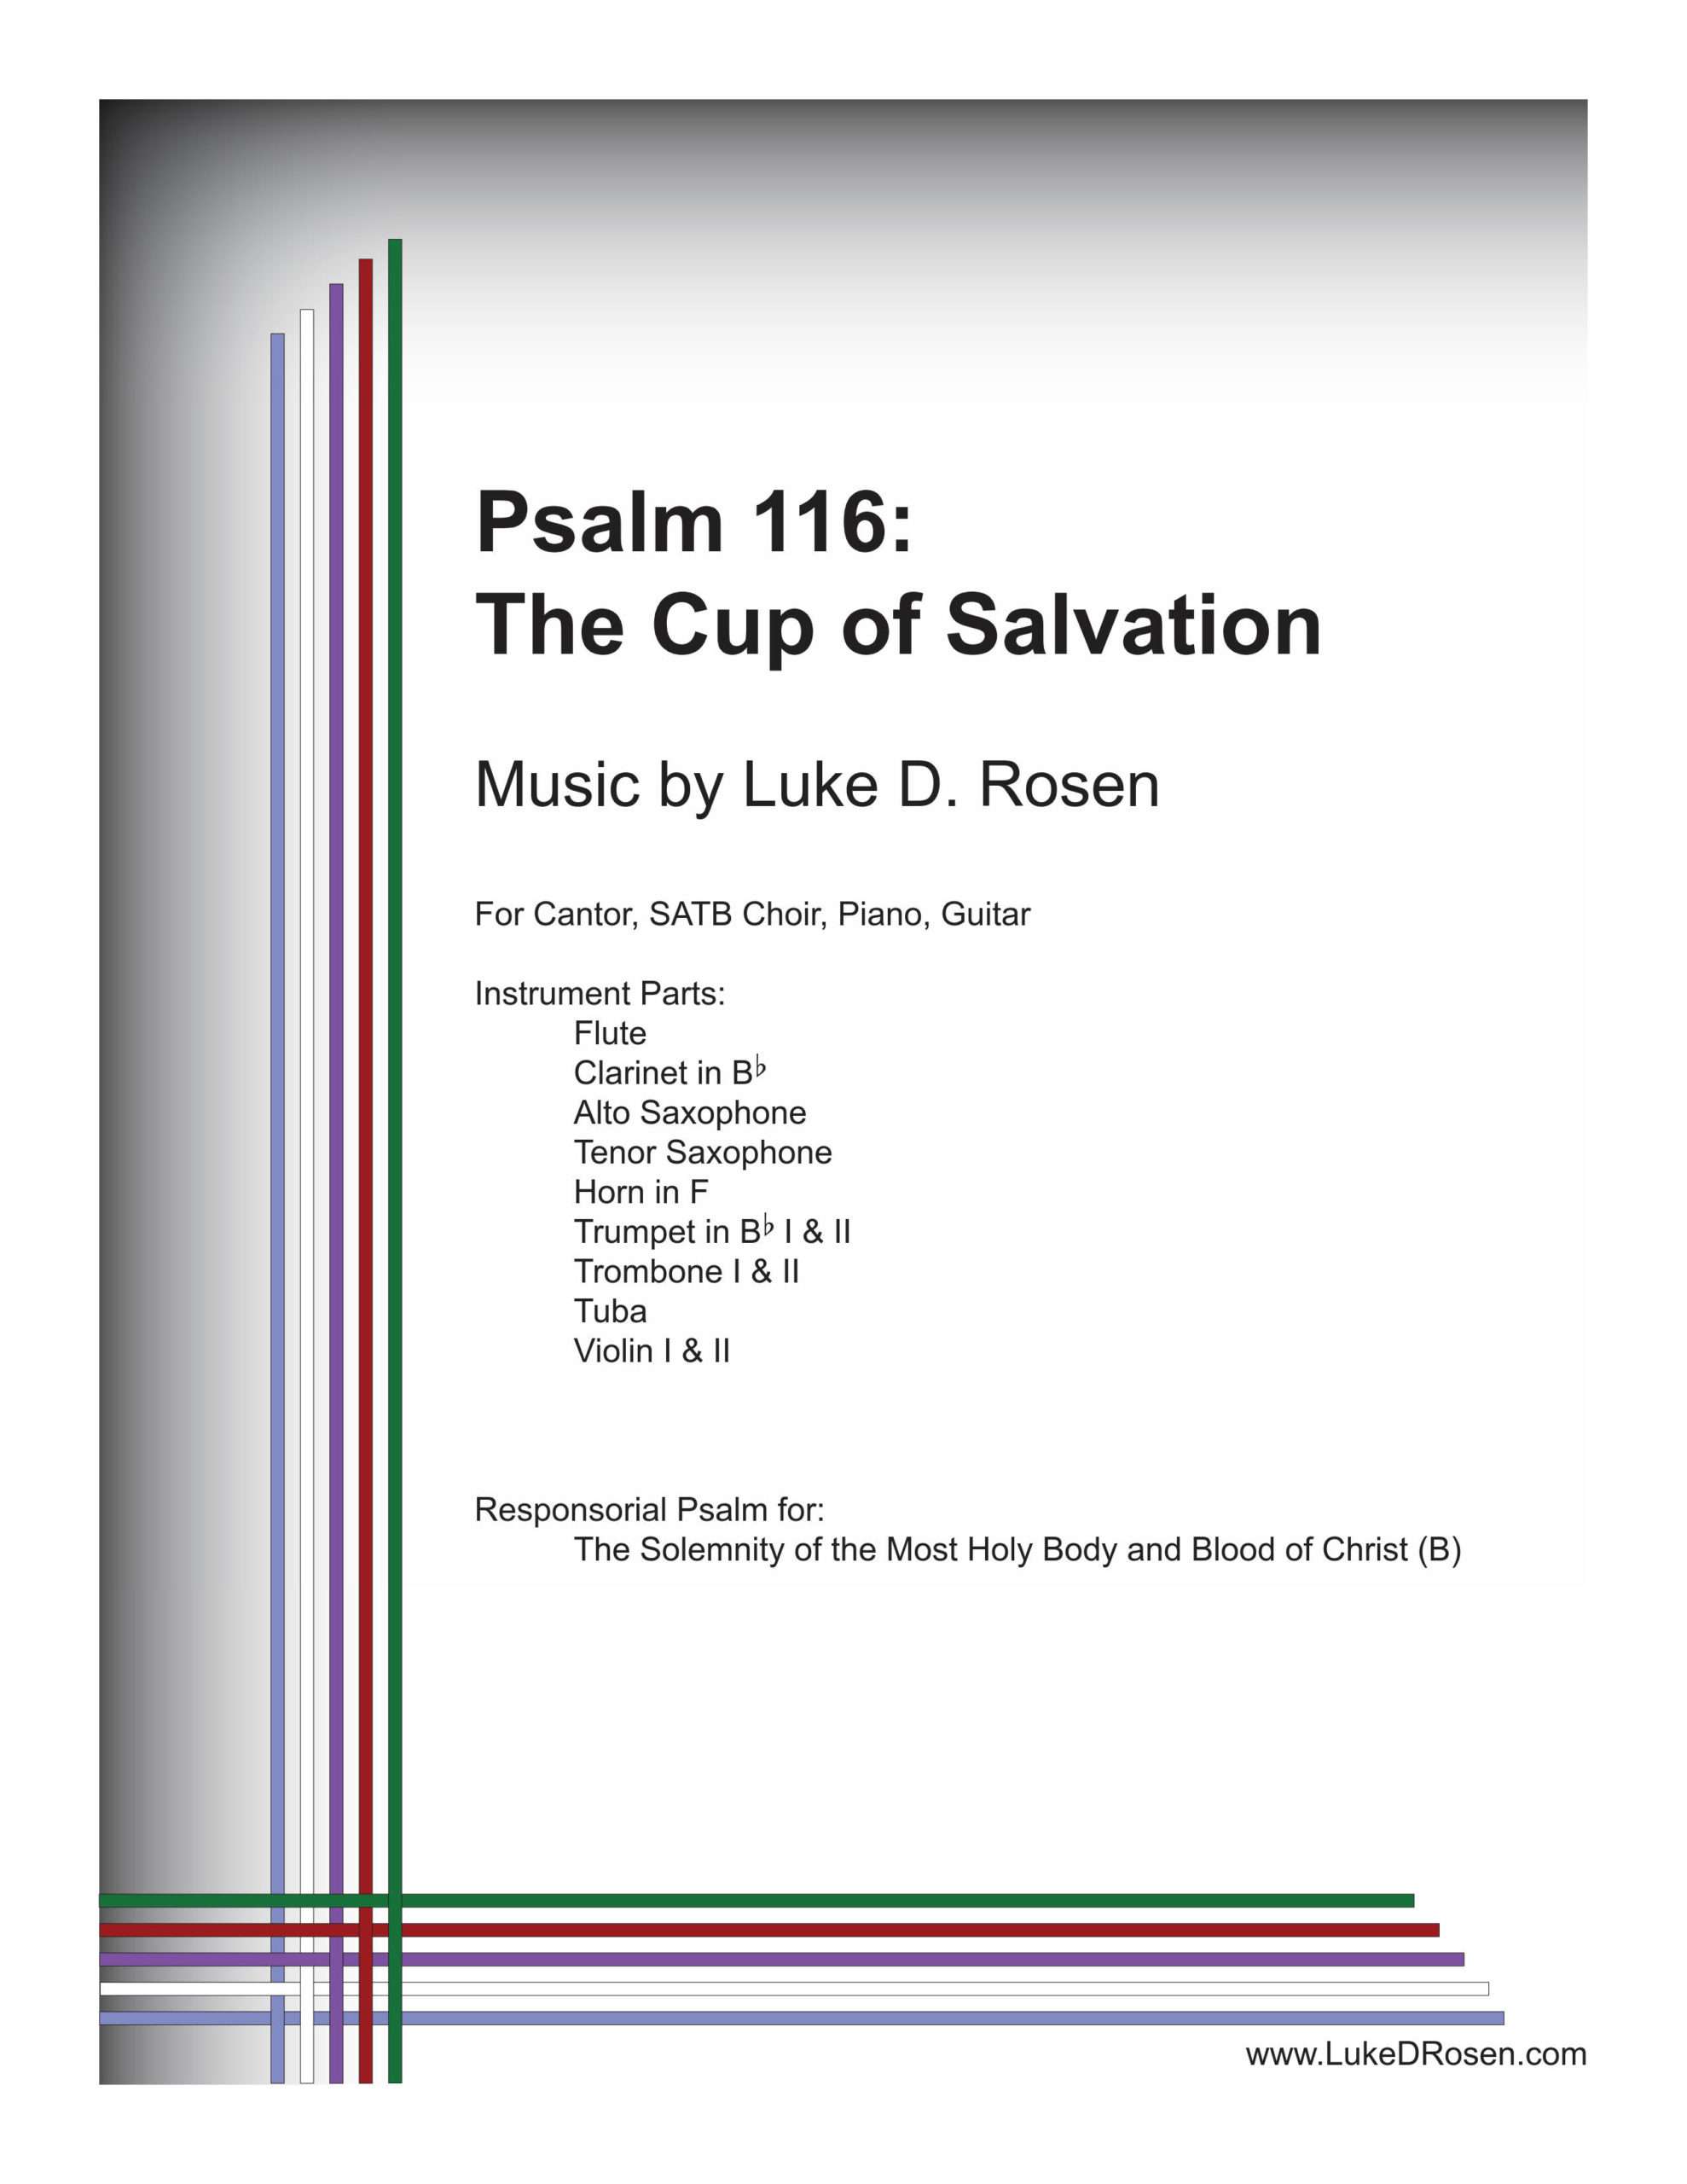 Psalm 116 – The Cup of Salvation (Rosen)